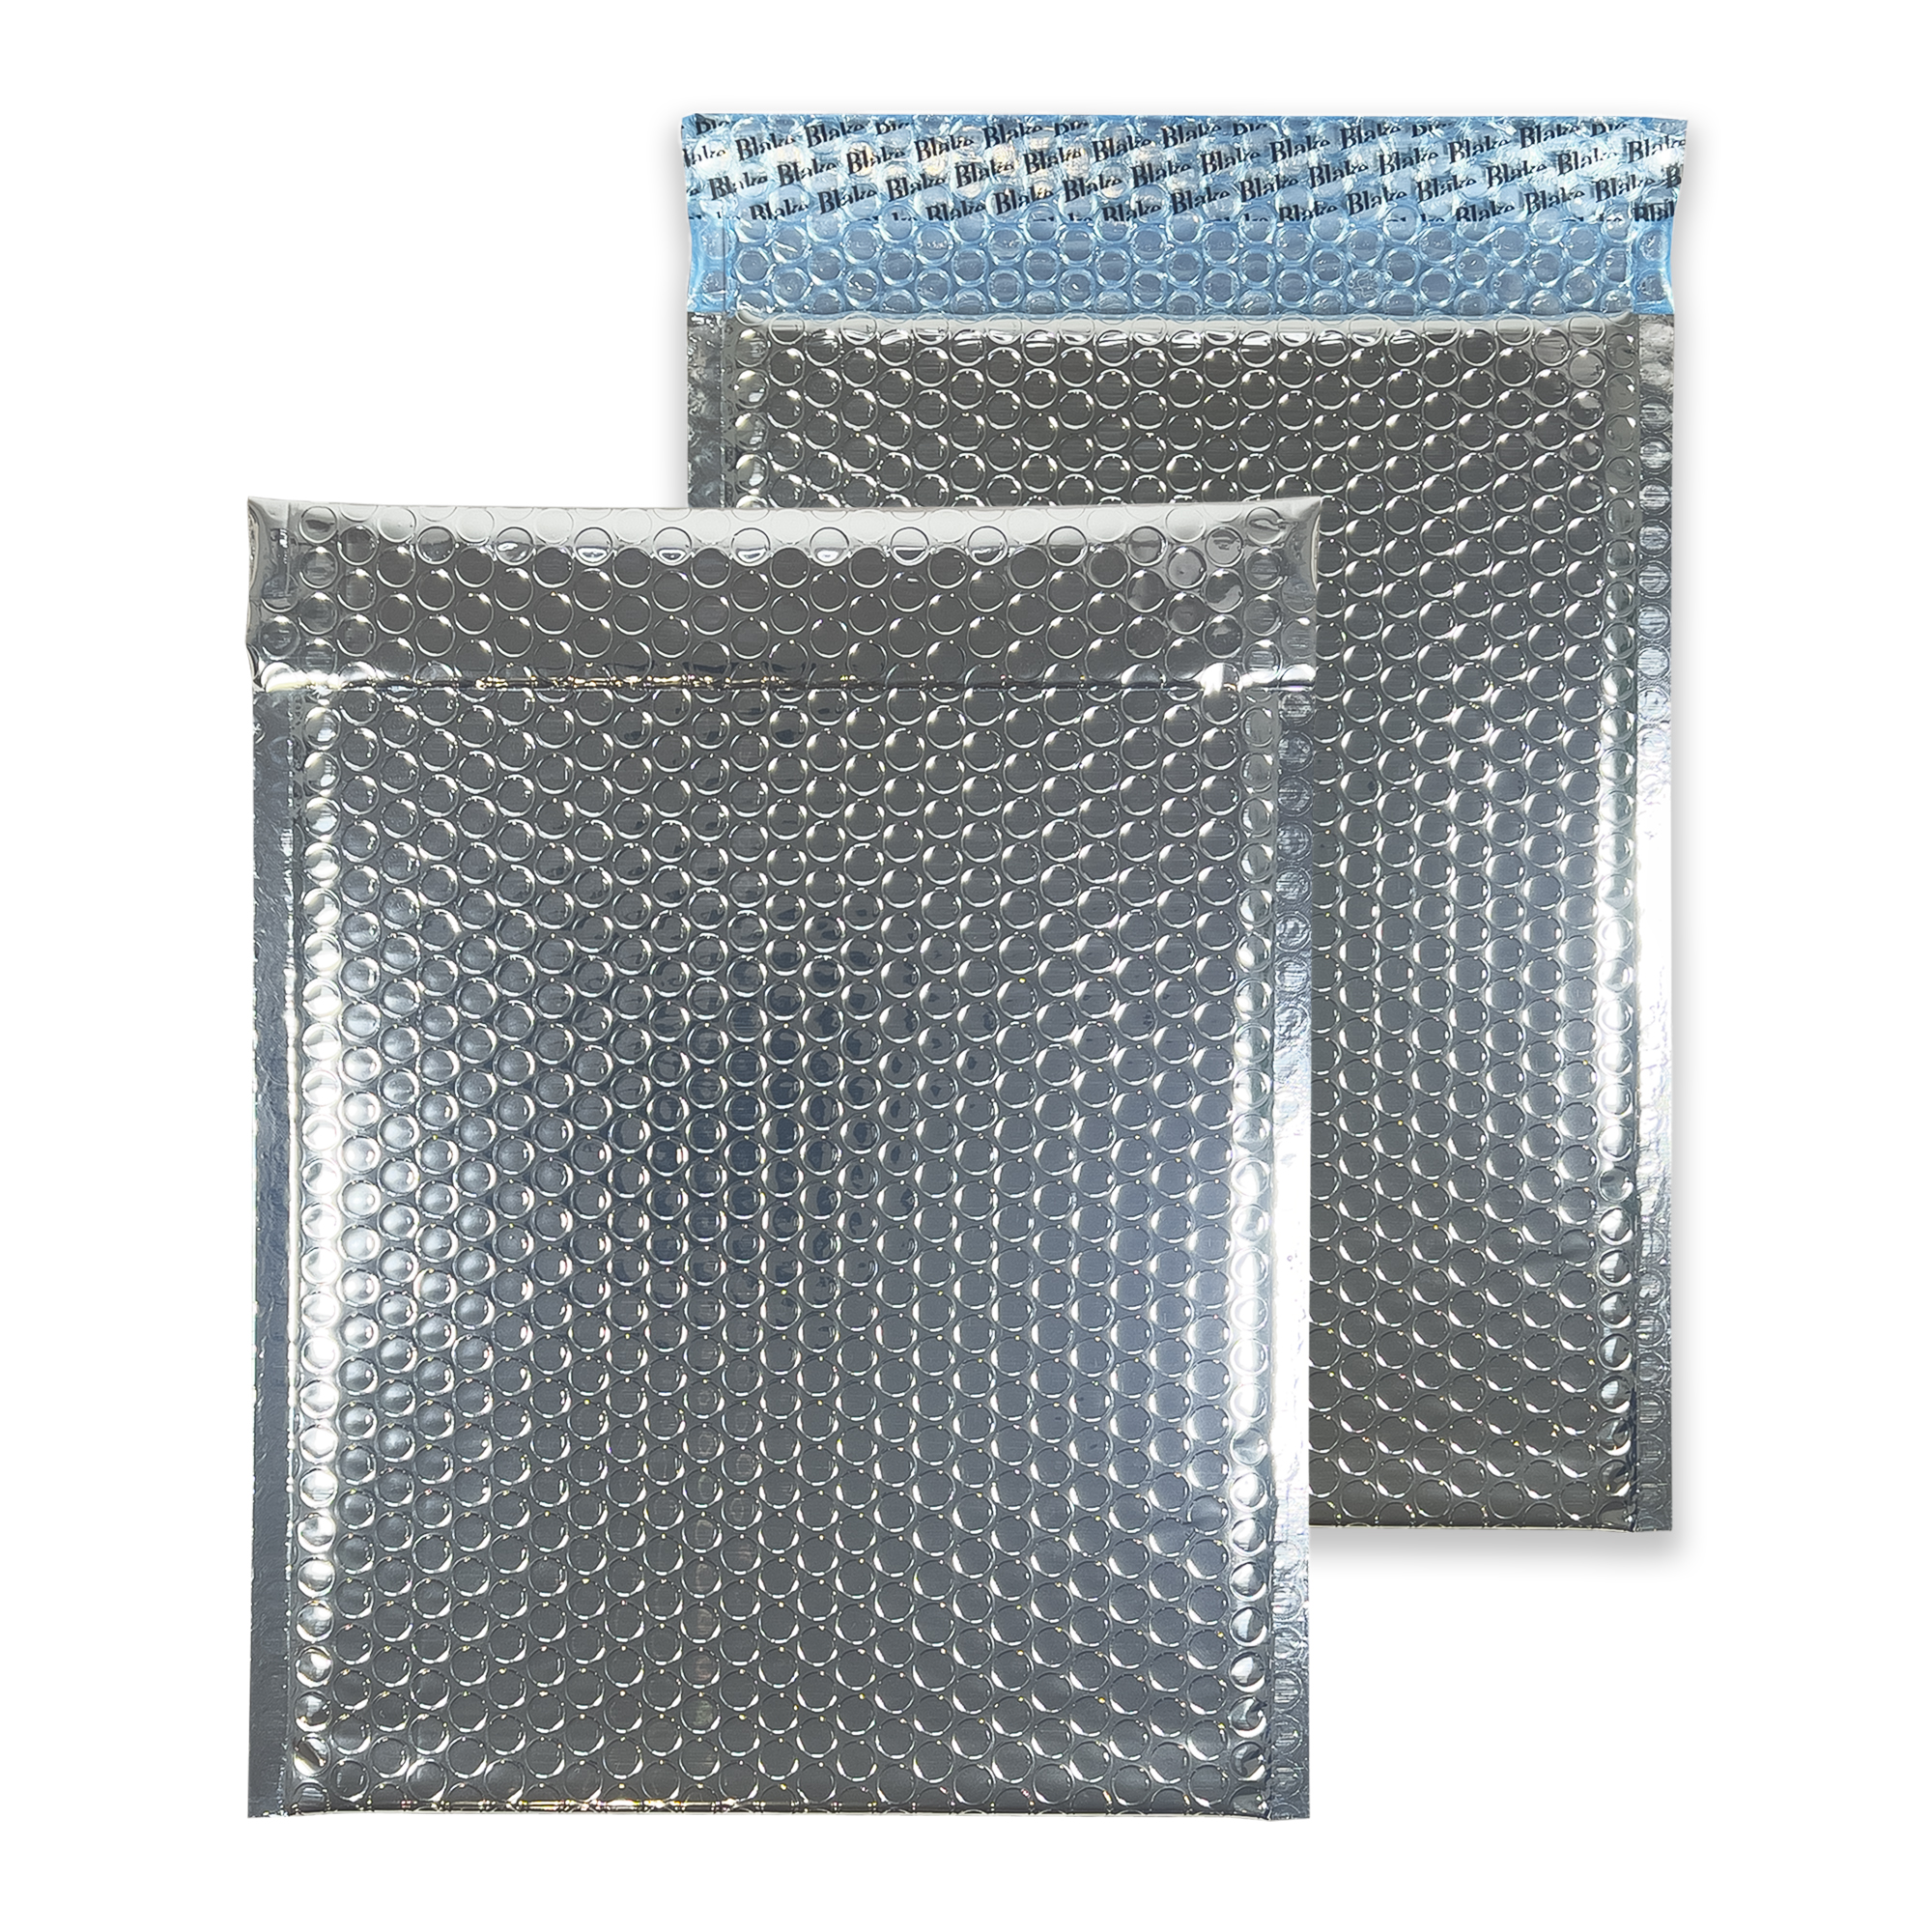 sterling-silver-bubble-padded-envelopes-rectangle-together